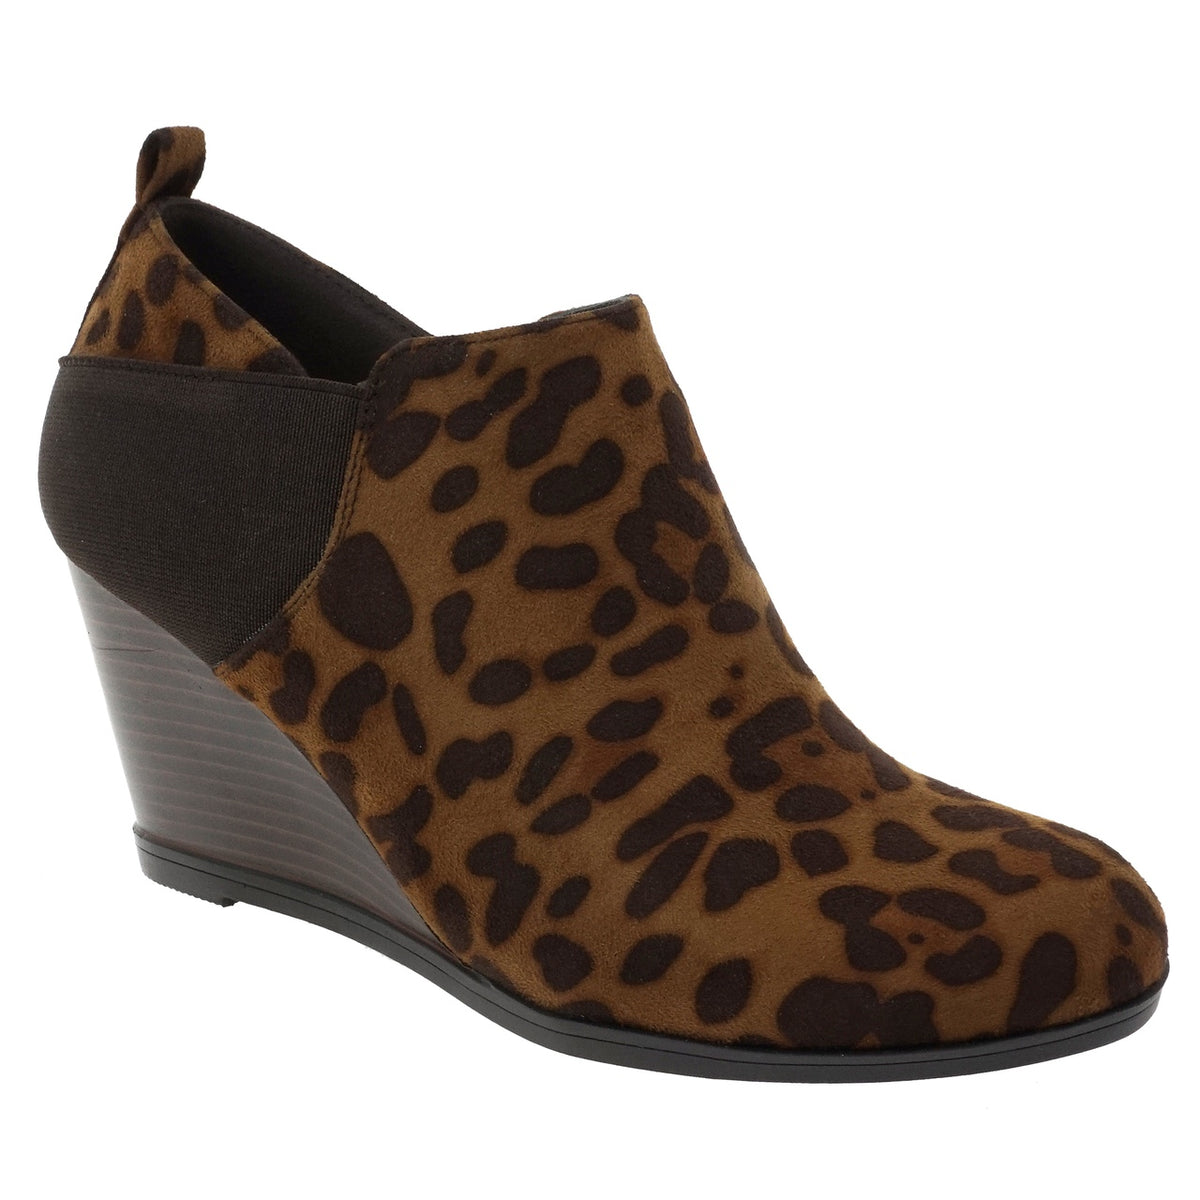 Remy Wedge Shoe